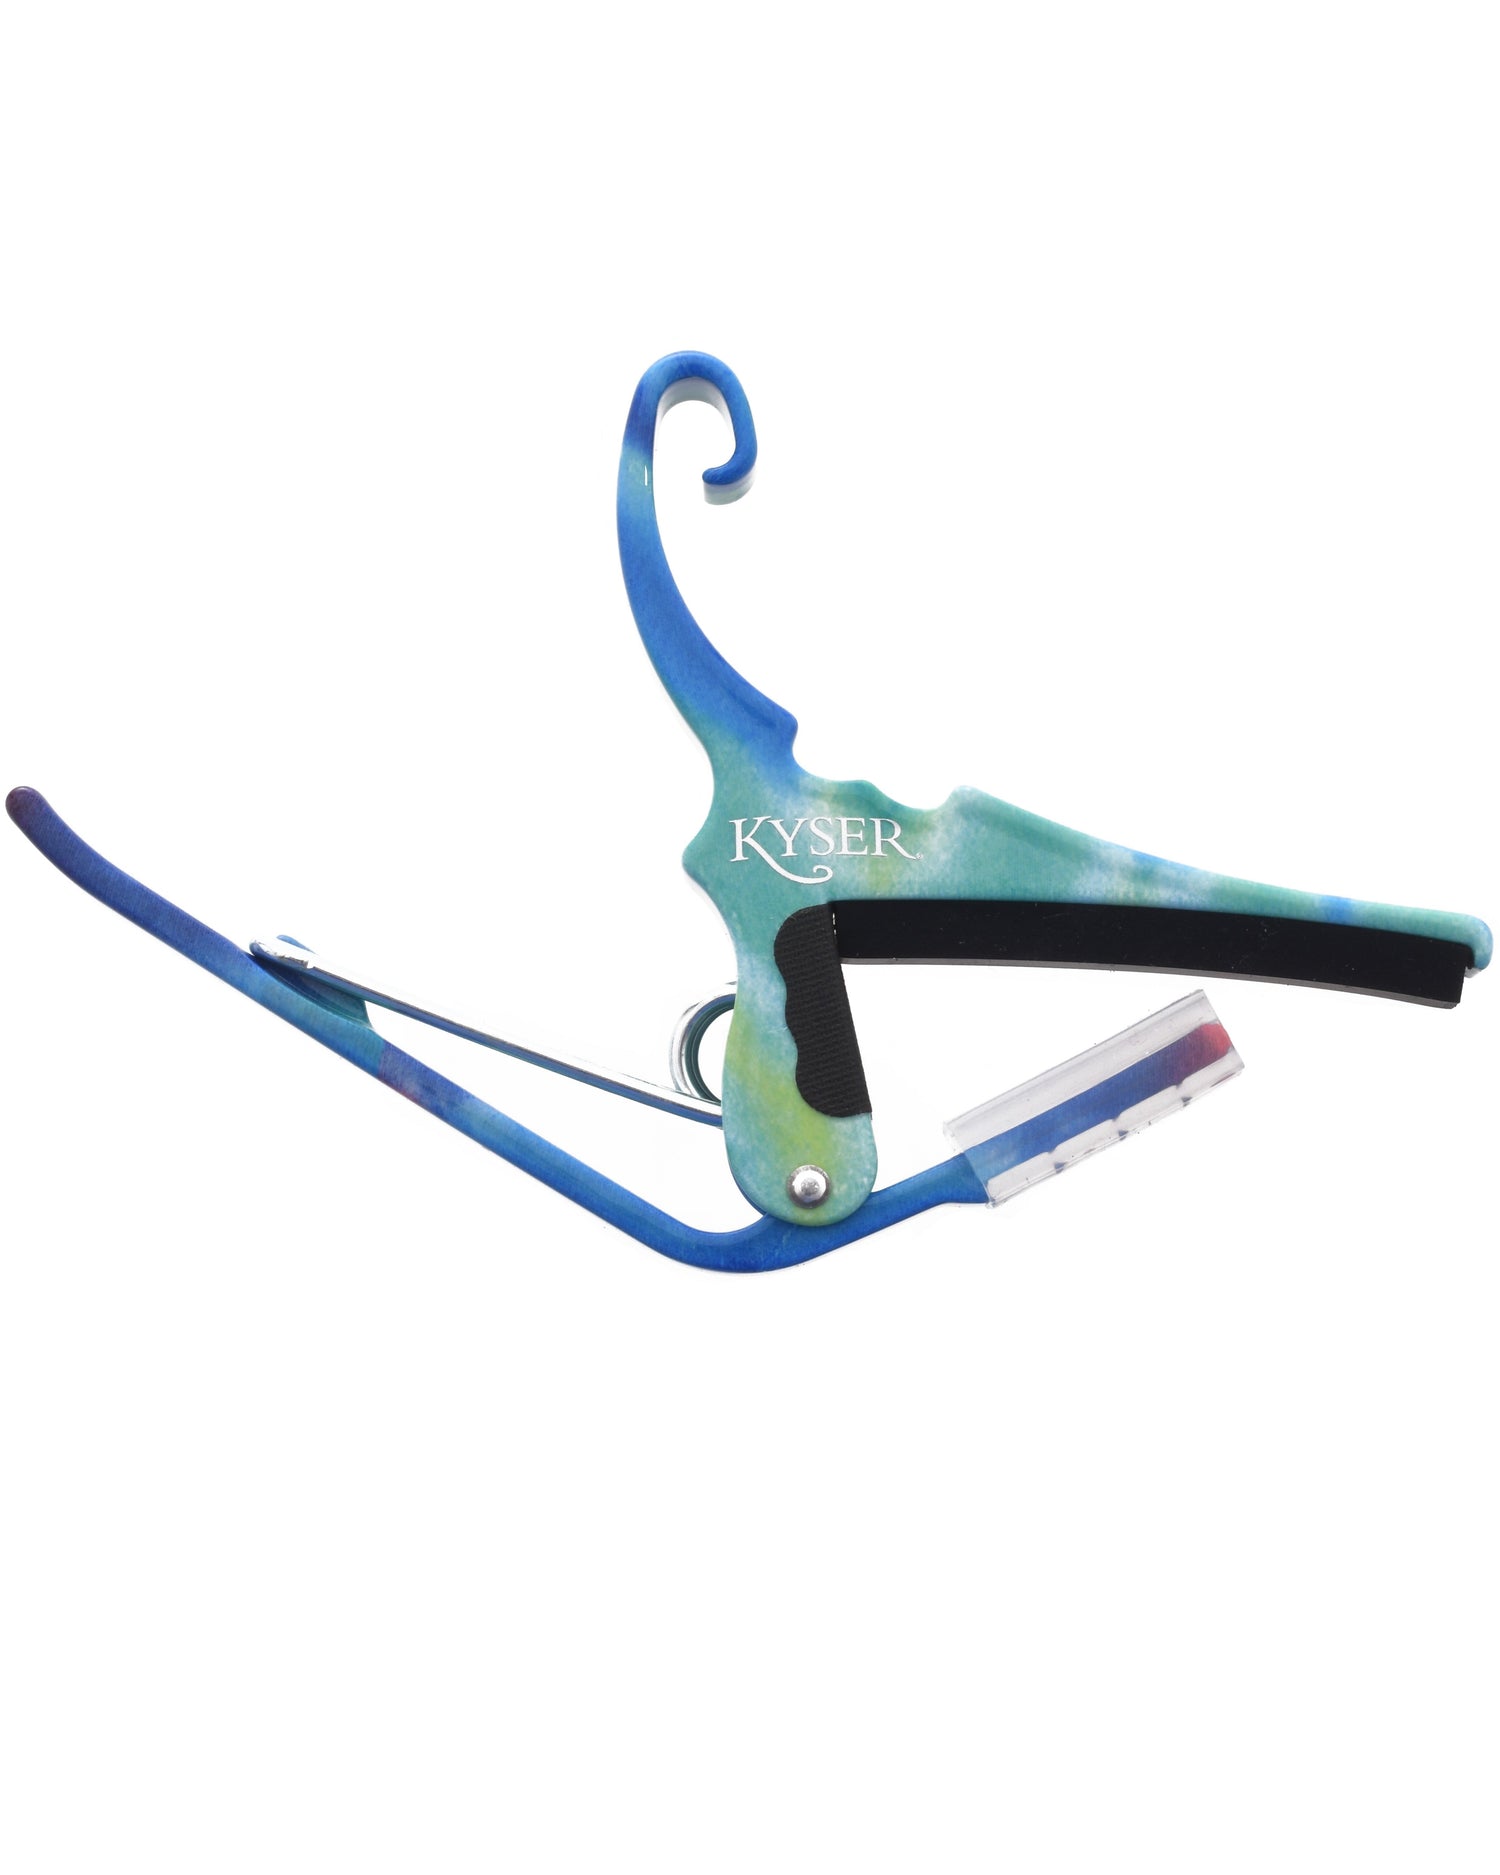 Image 1 of Kyser Quick Change Guitar Capo - SKU# KGC1-TIEDYE : Product Type Accessories & Parts : Elderly Instruments